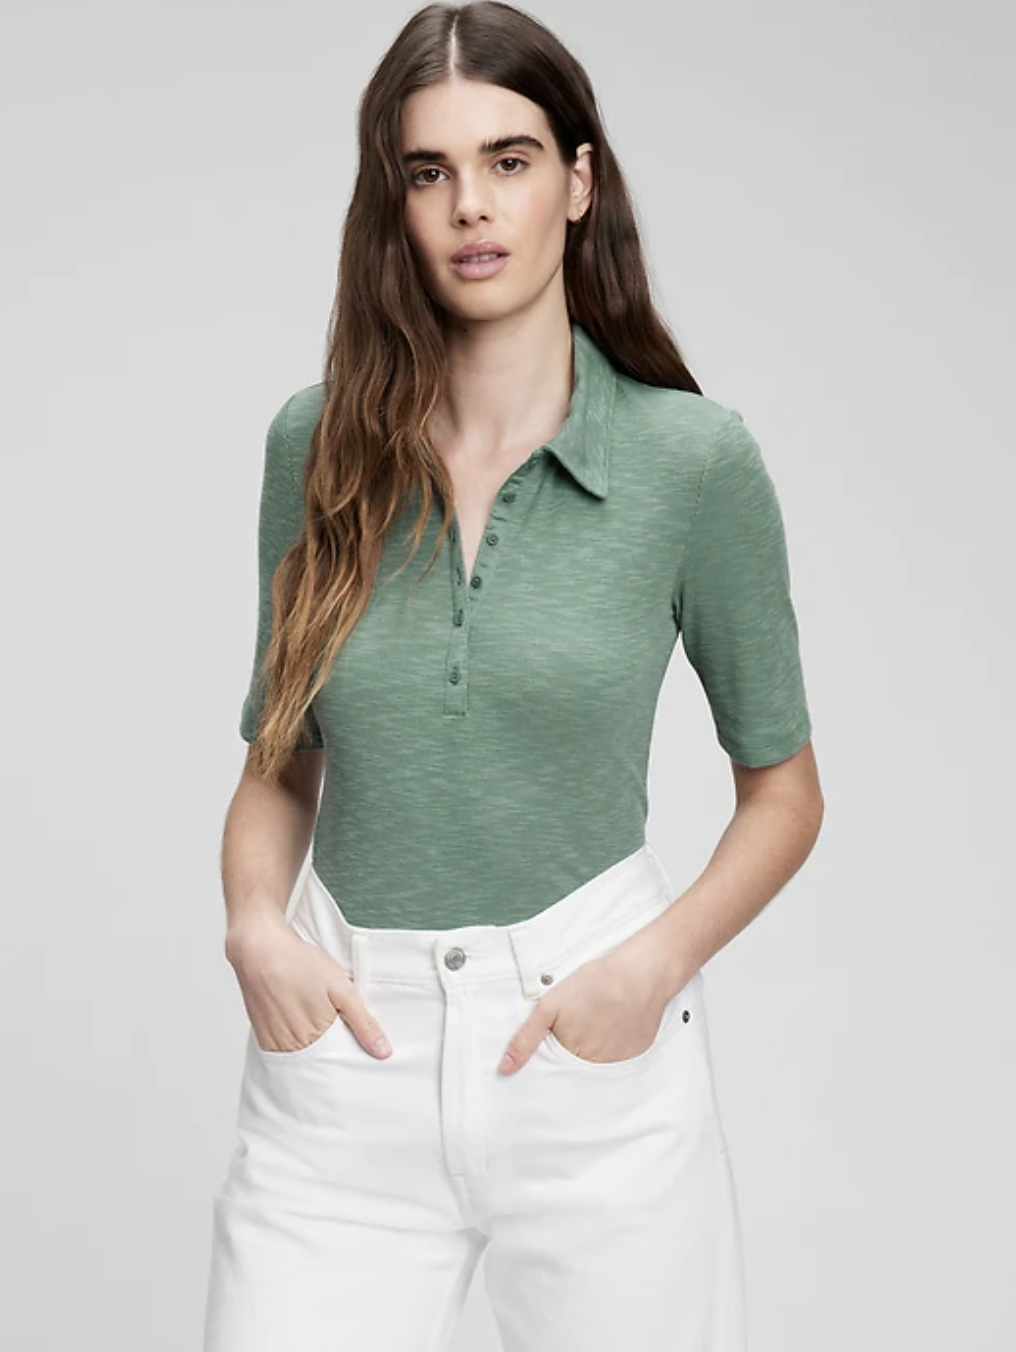 best places to buy business casual clothes